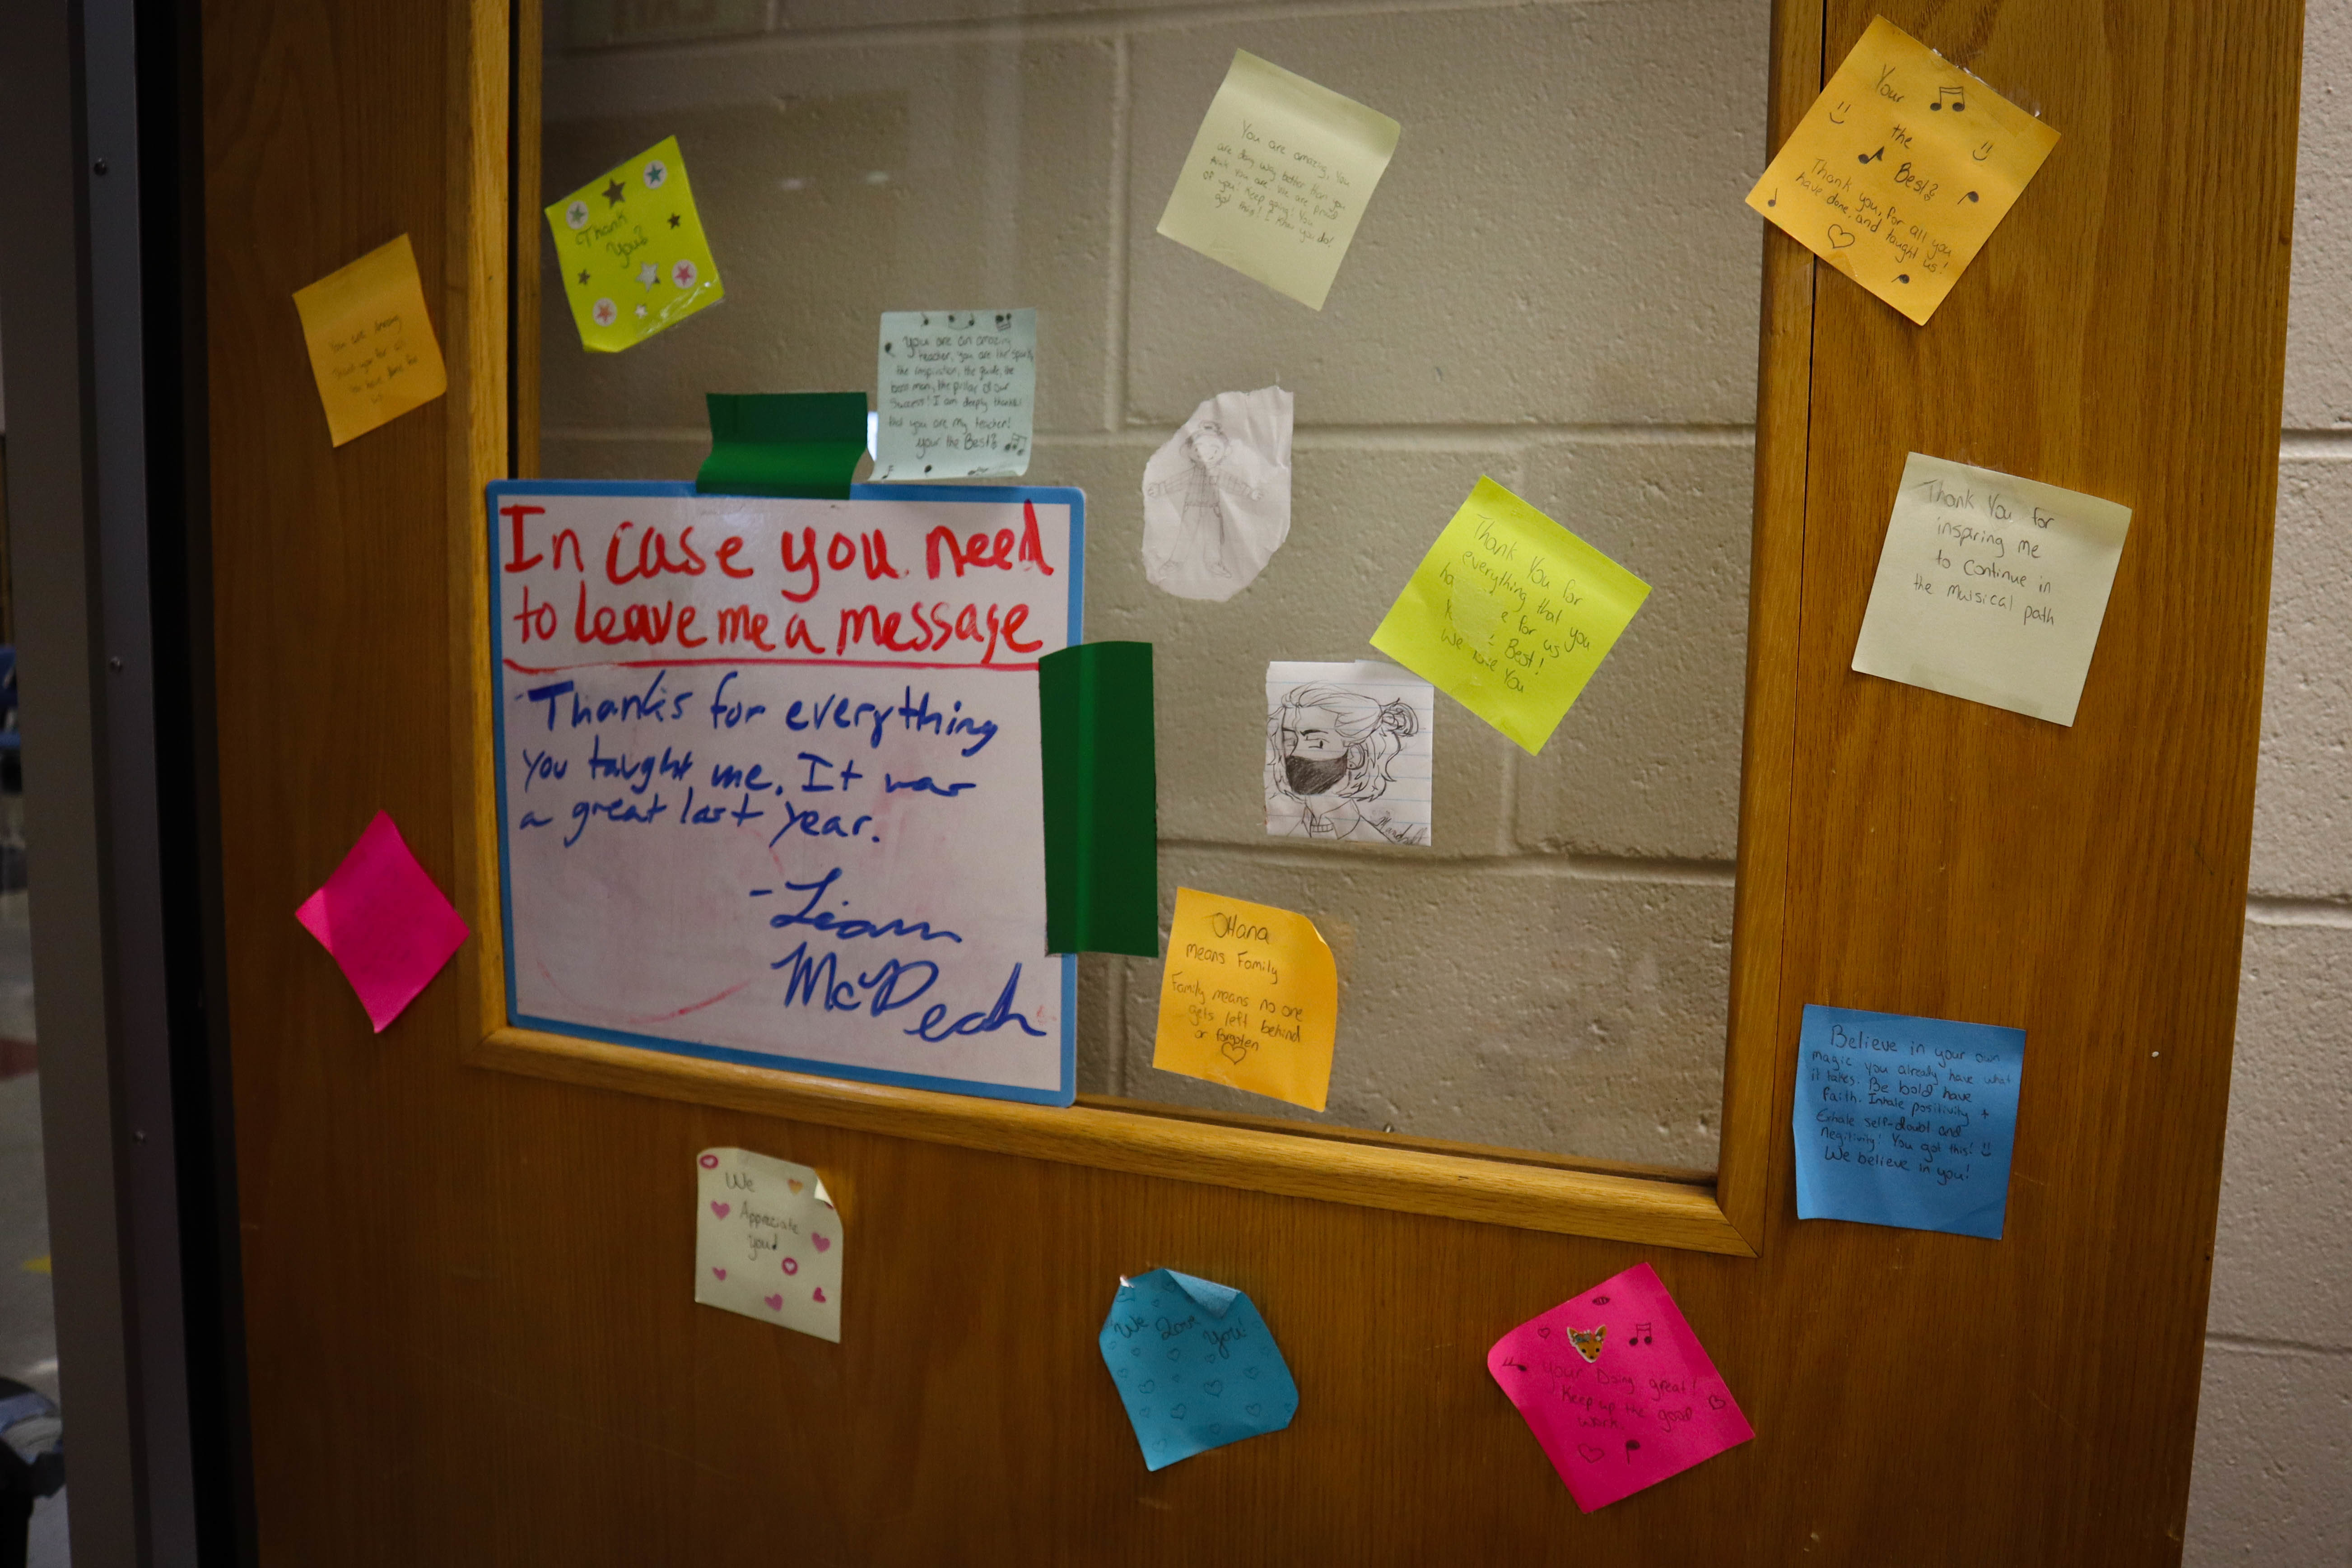 Notes left by students for Vinnie